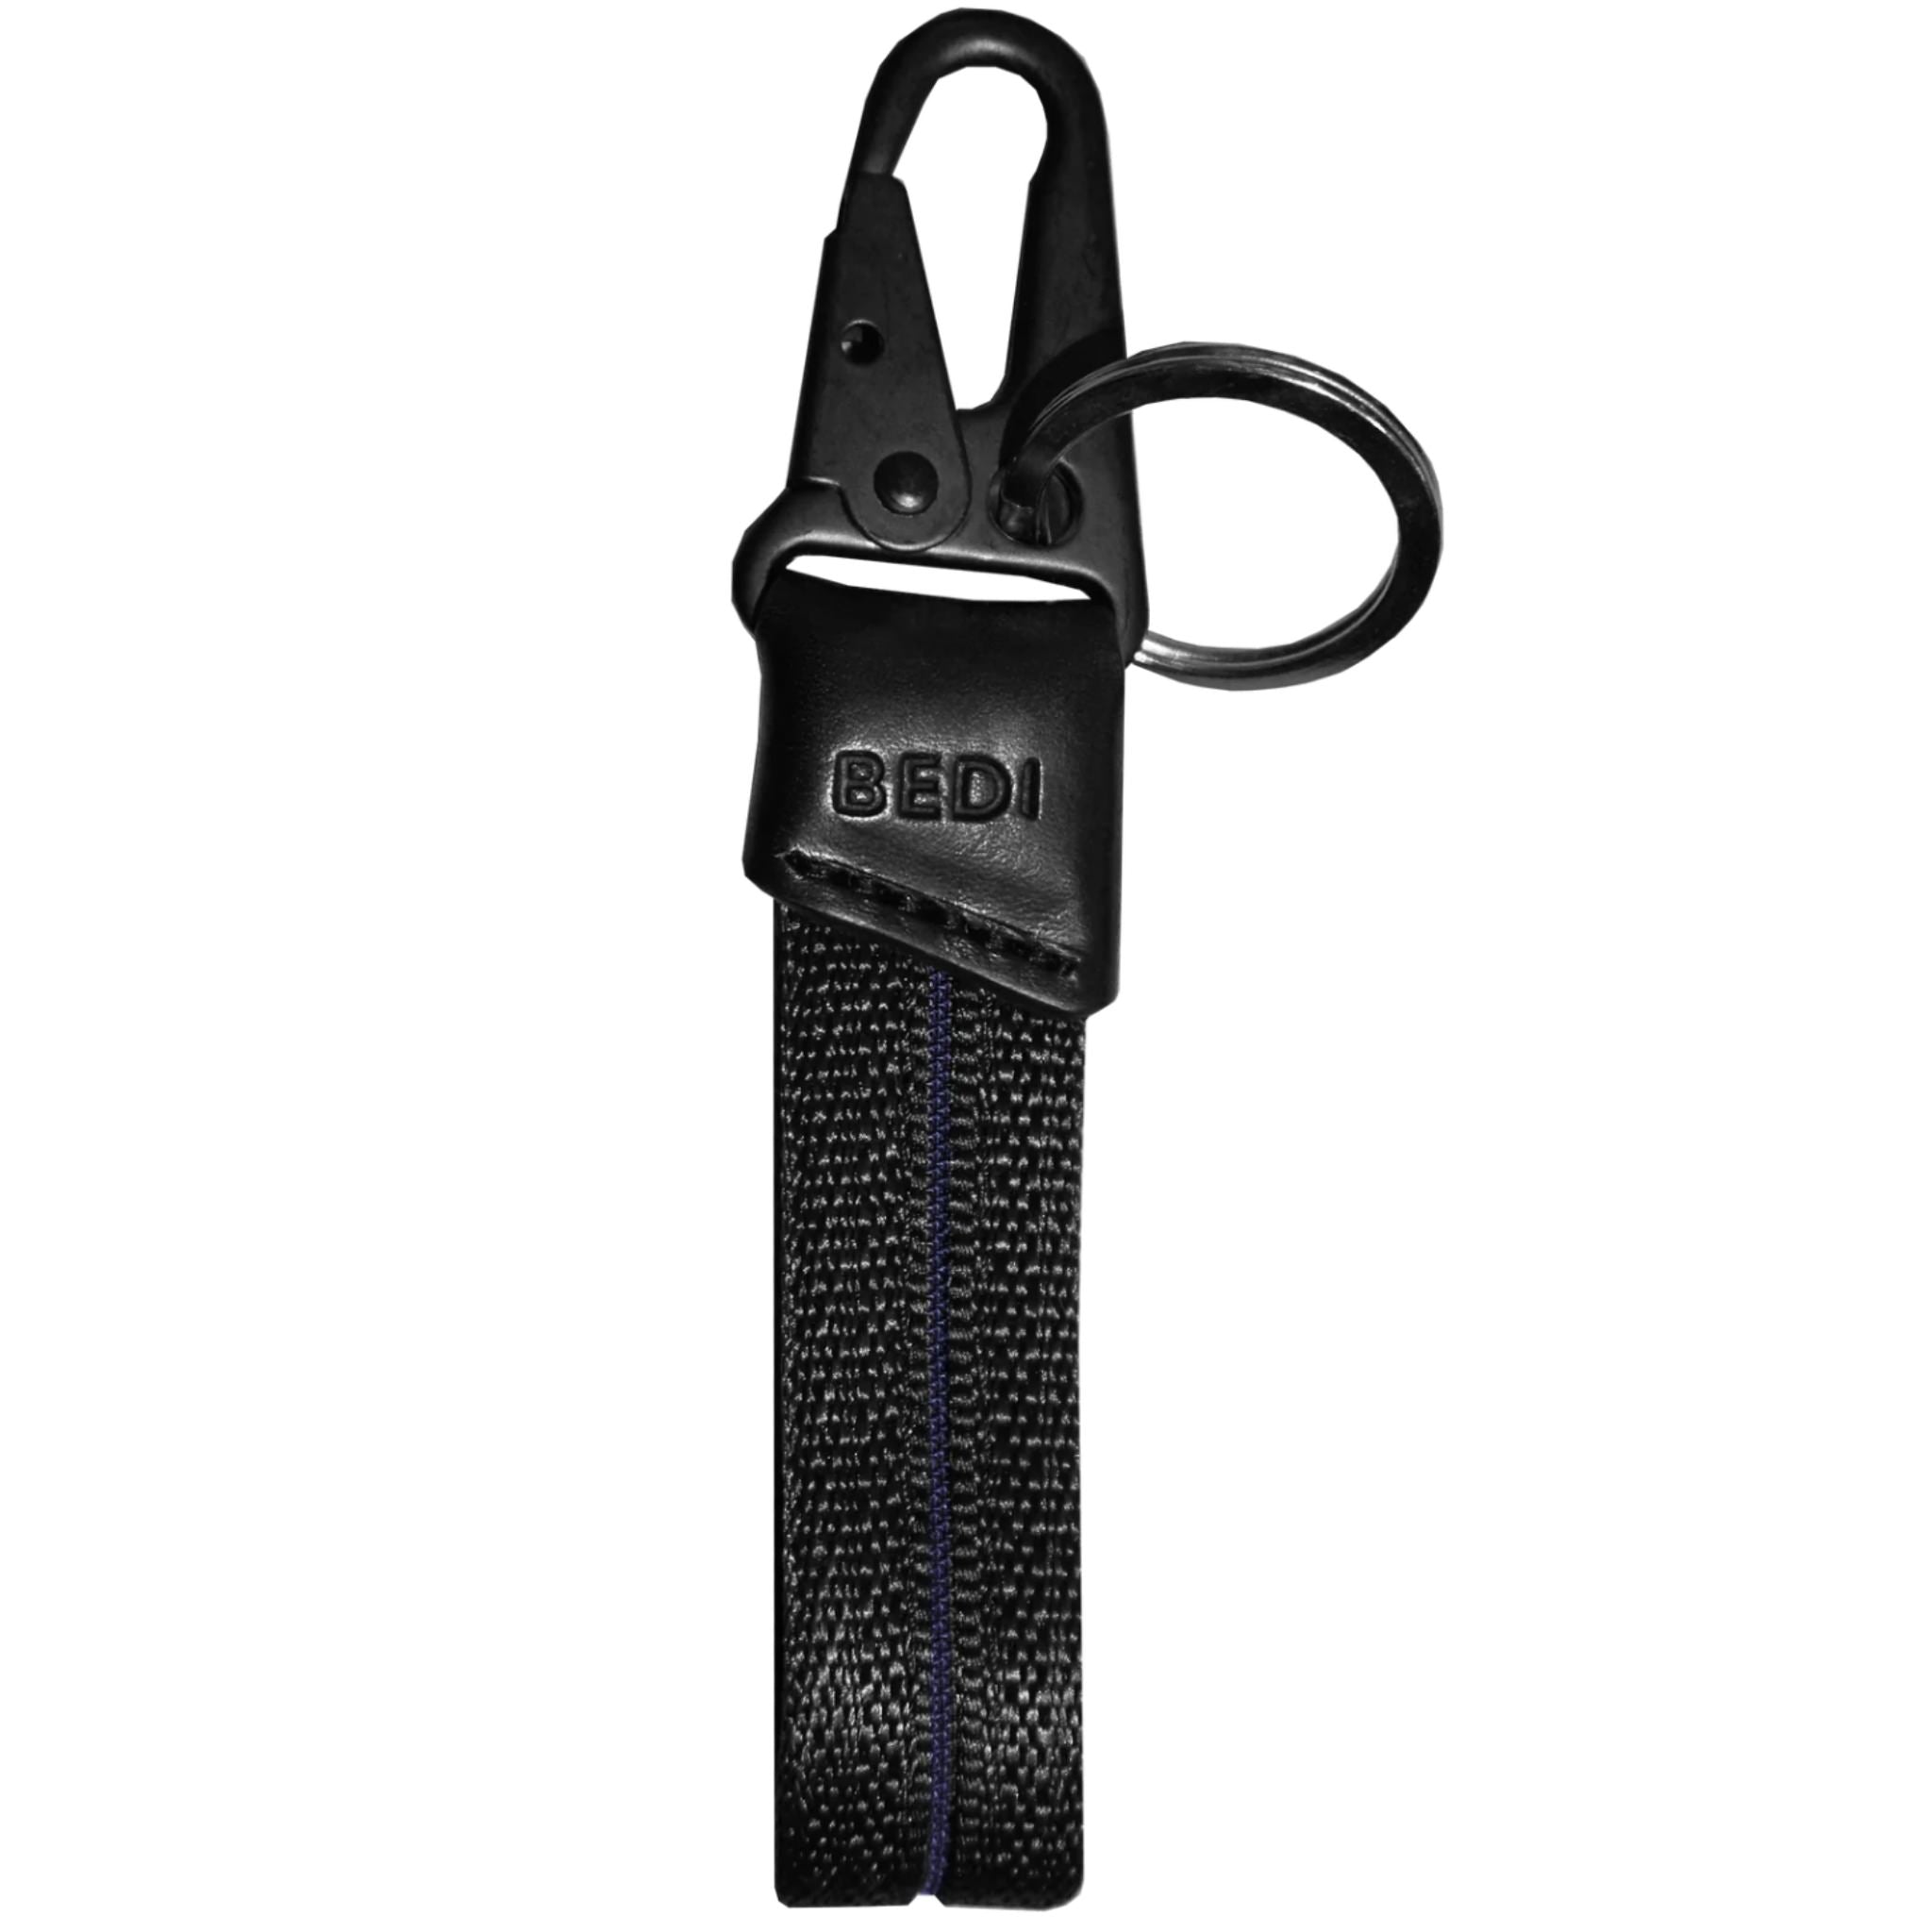 Black keychain made from seatbelt material, with thin line of inset blue down the middle